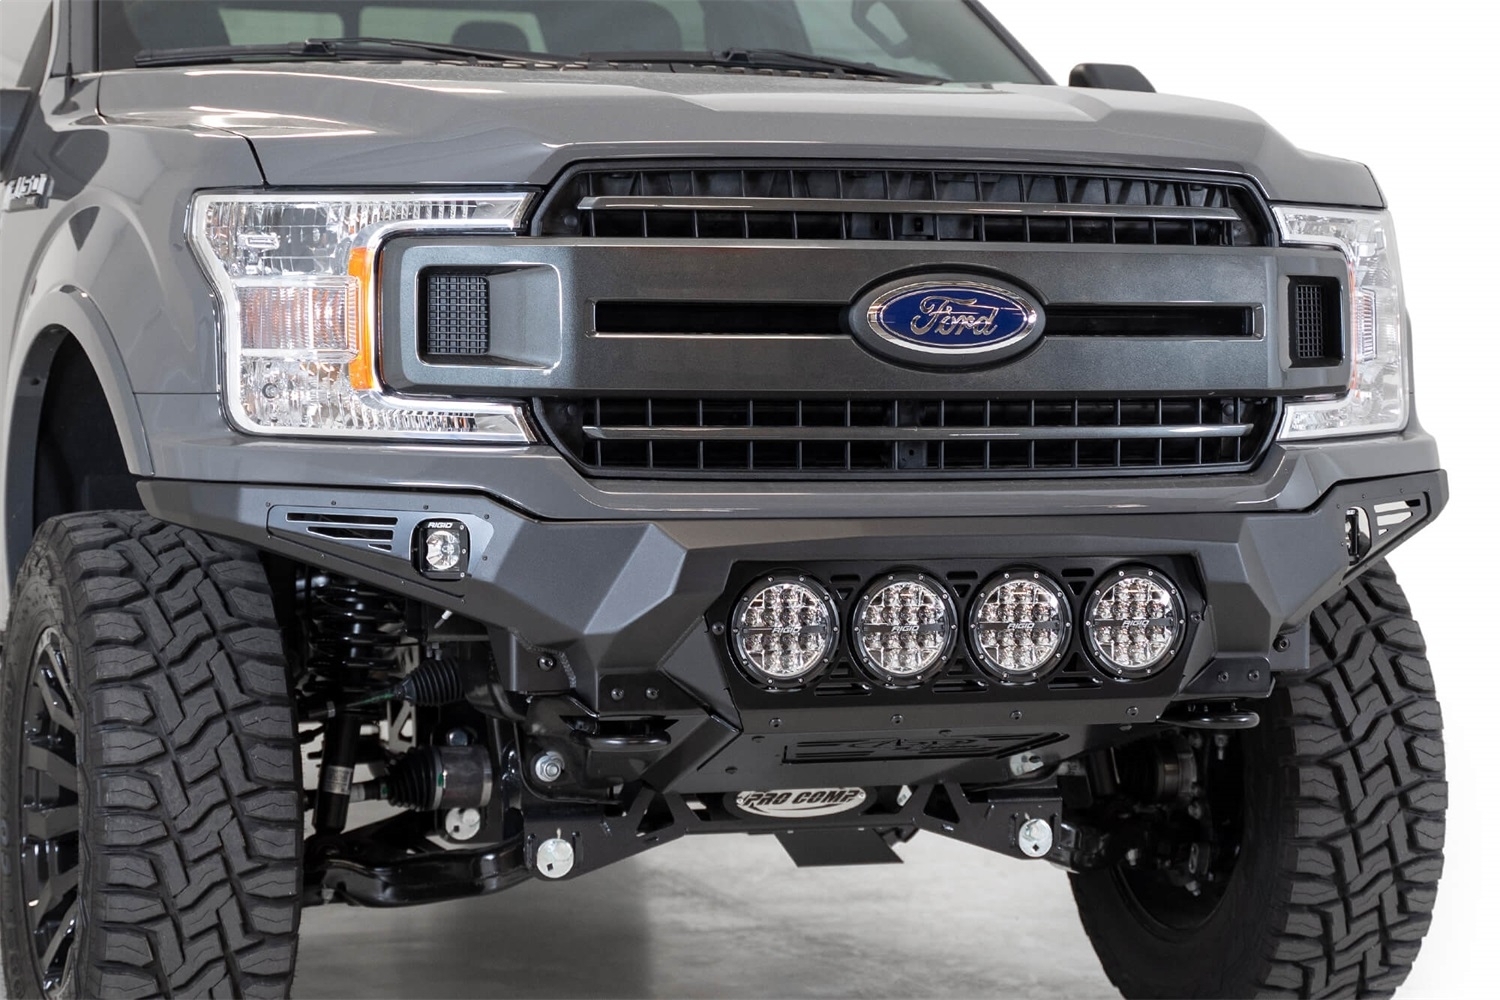 Addictive Desert Designs Bomber Front Bumper With Rigid Light Mounts For 18-20 Ford F-150